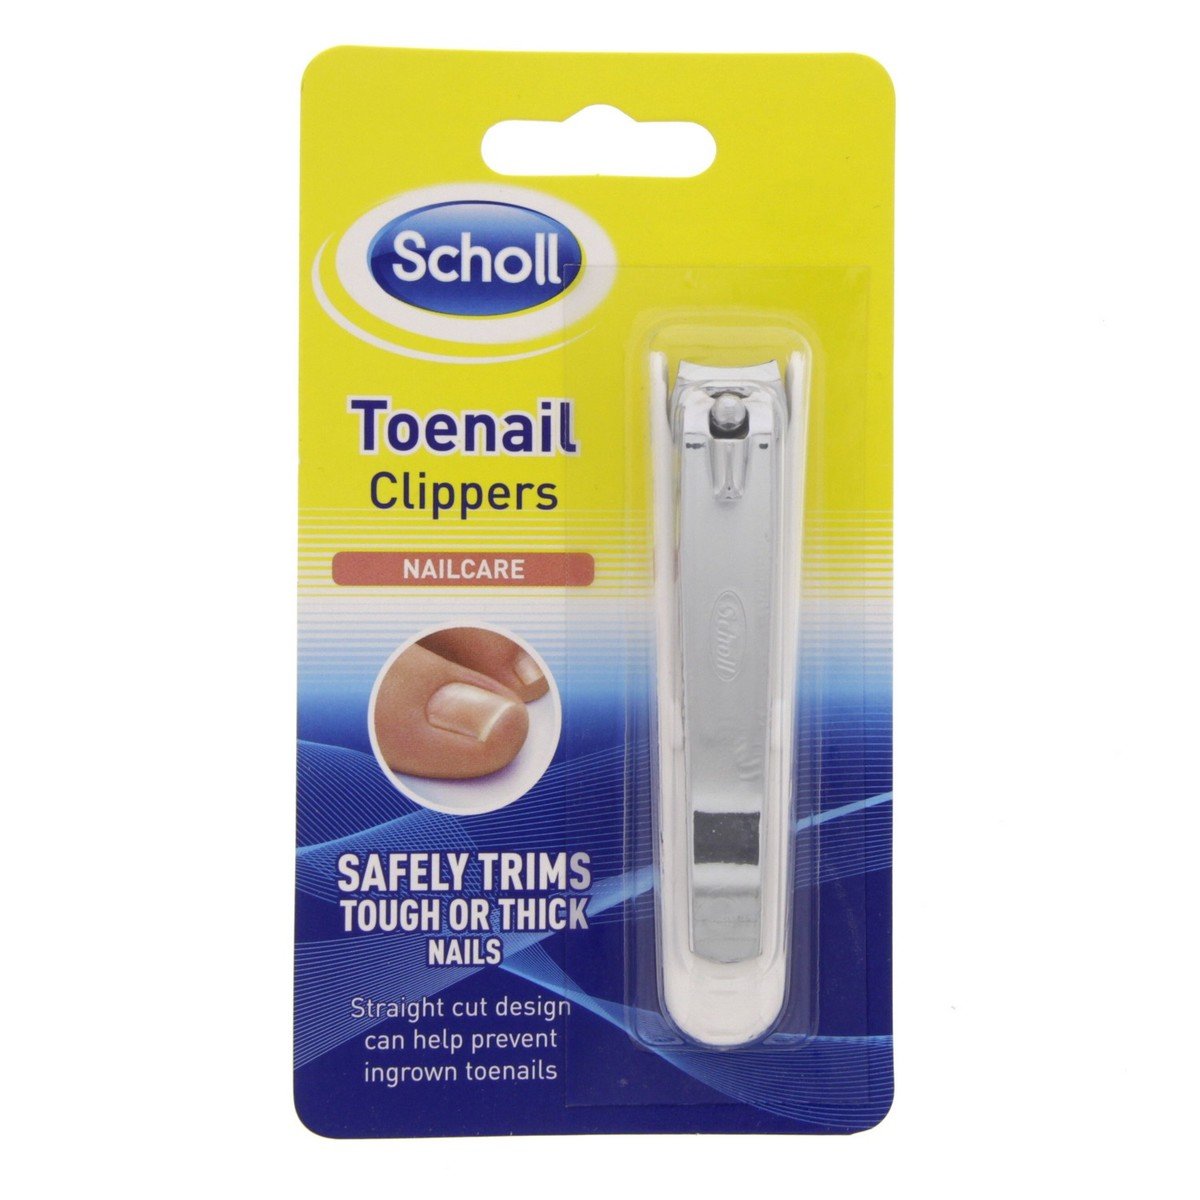 Scholl Toenail Clippers Nailcare 1pc